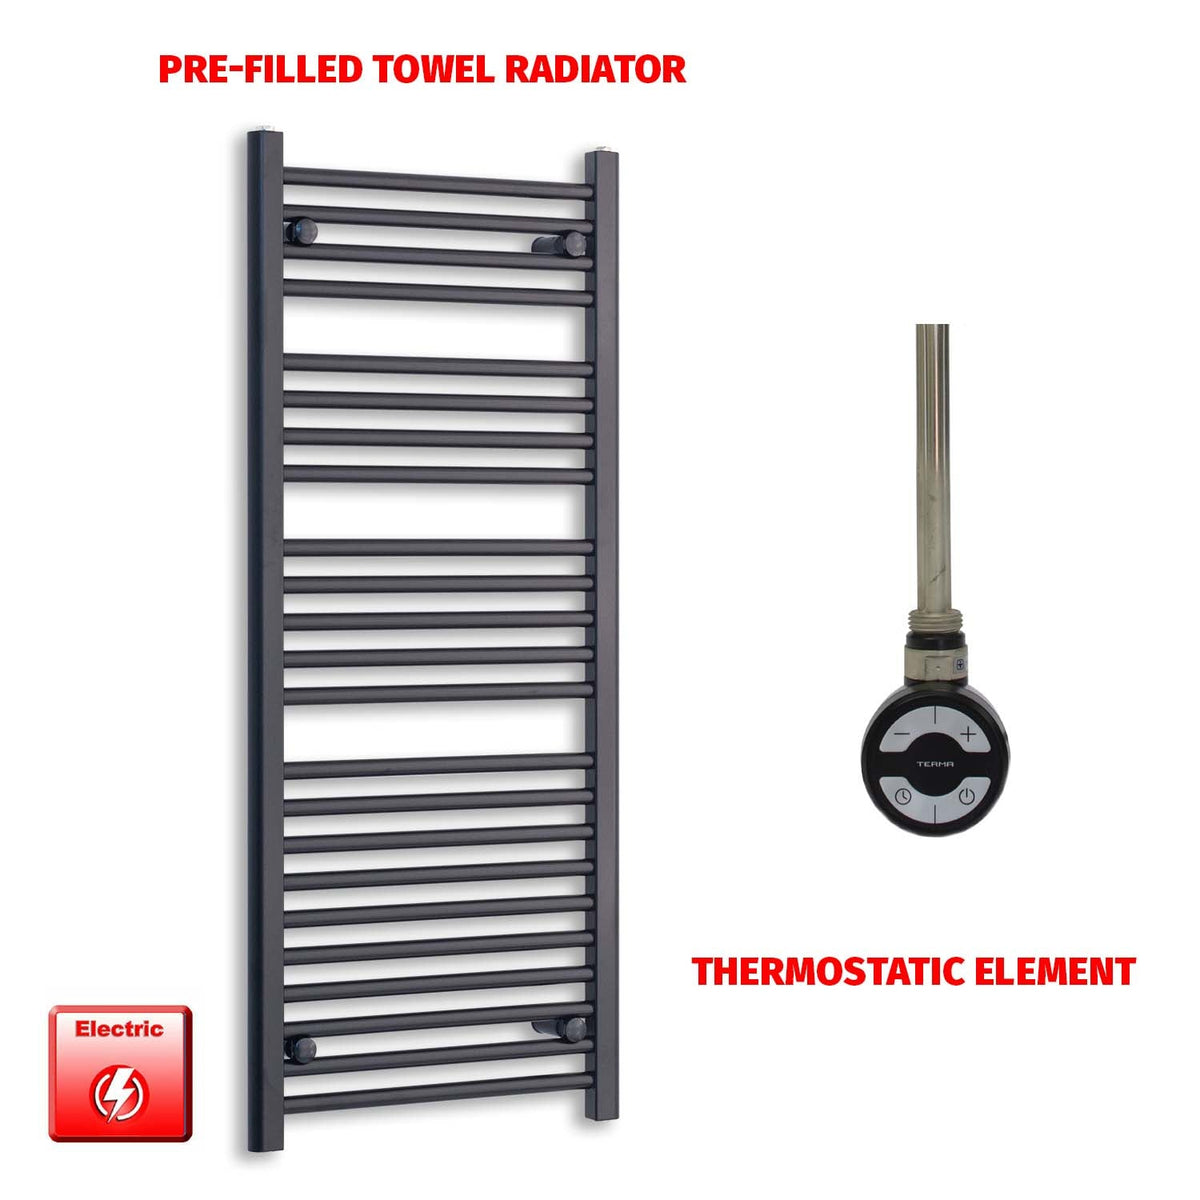 1200 x 550mm Wide Flat Black Pre-Filled Electric Heated Towel Radiator HTR MOA Thermostatic No Timer